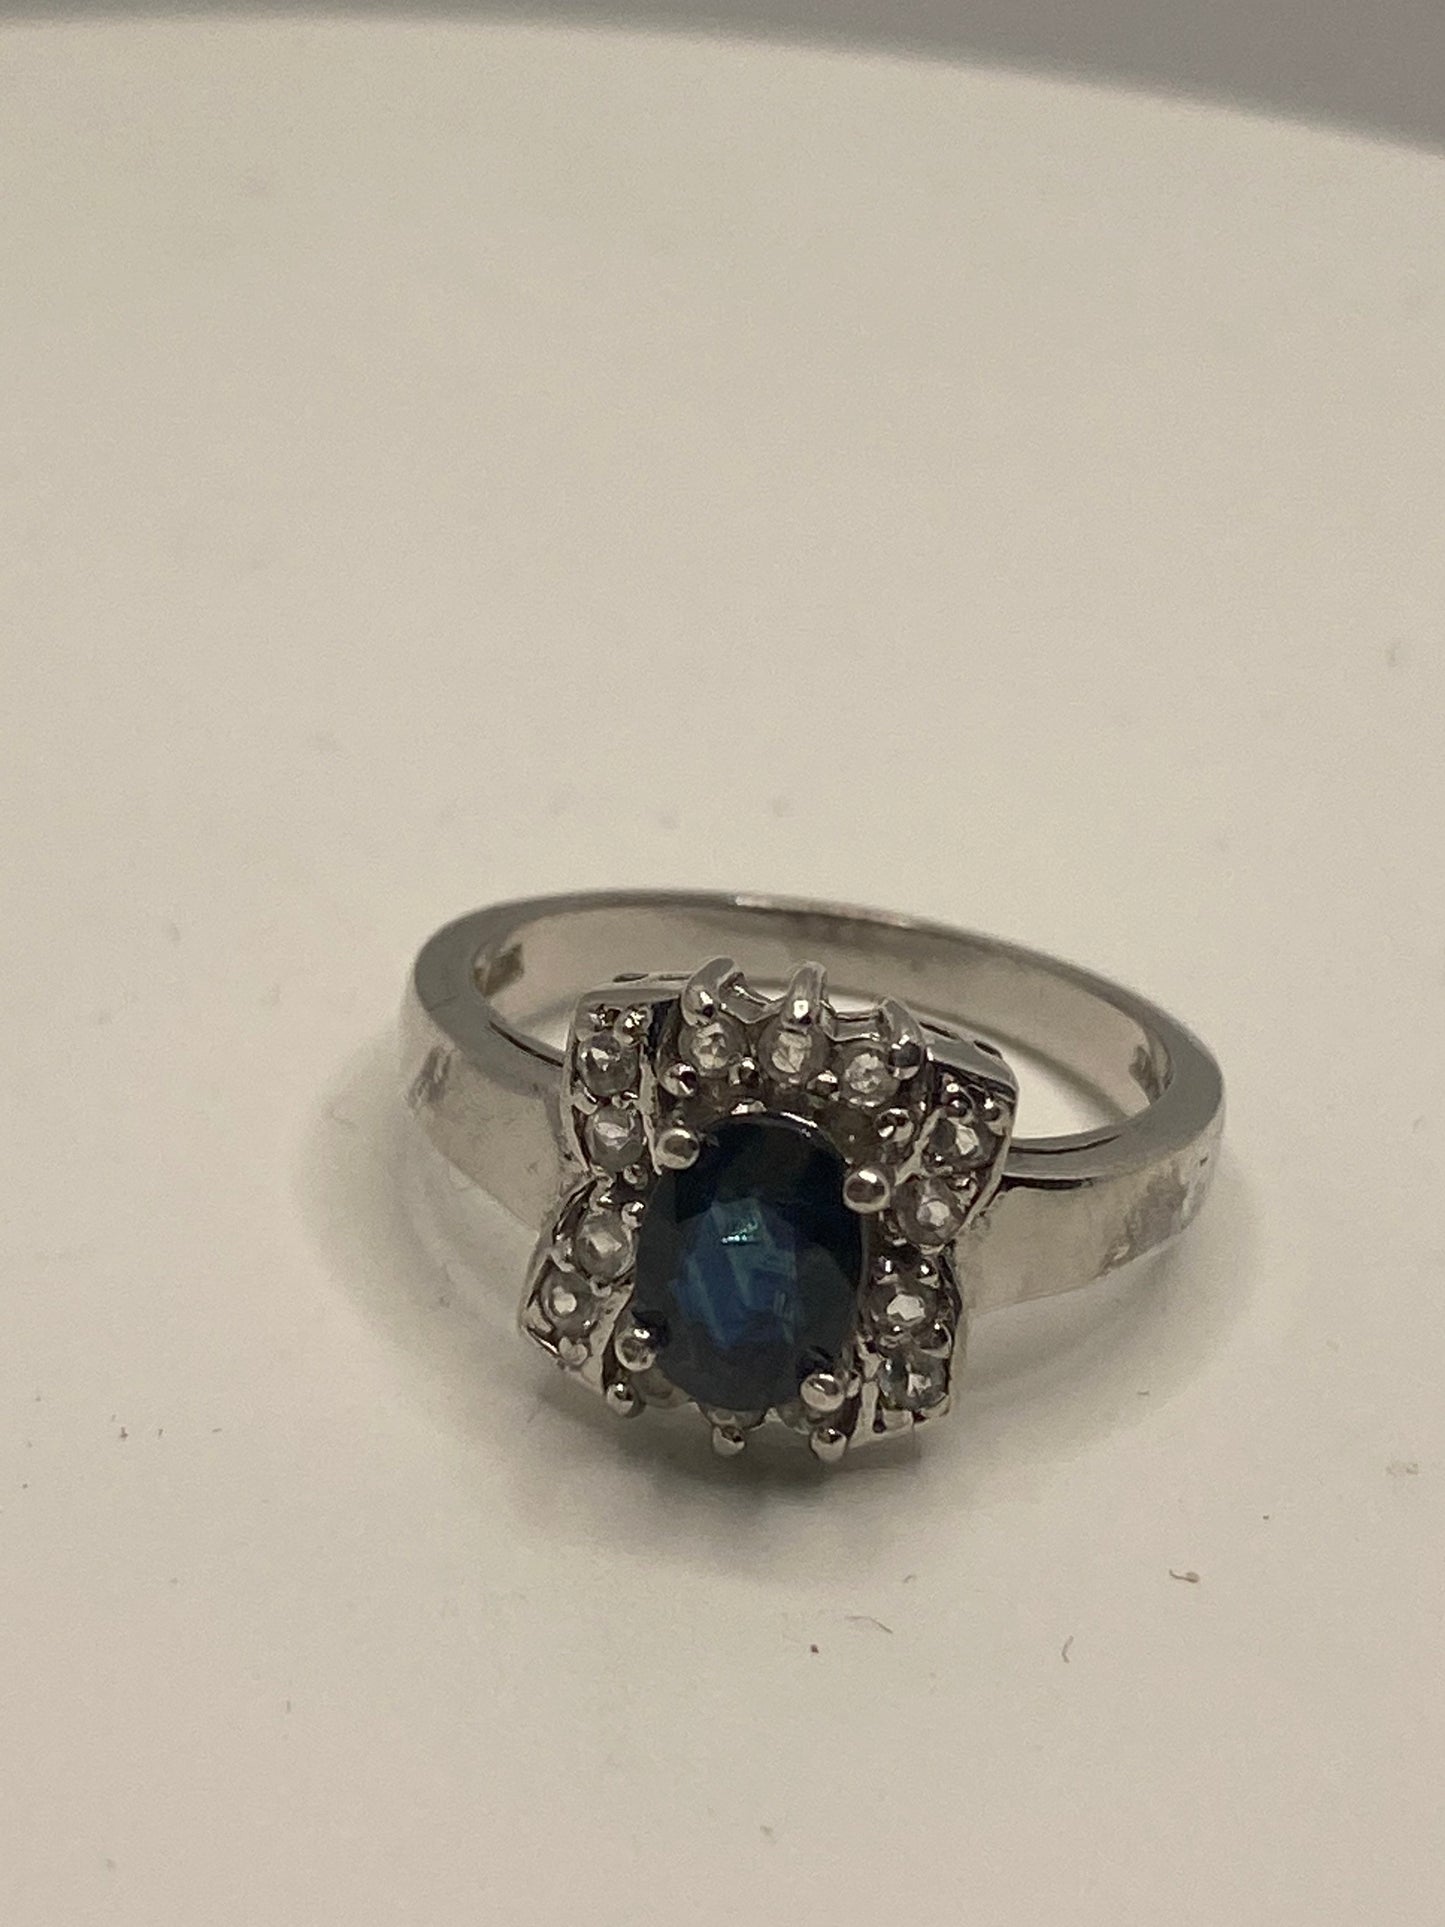 Vintage Blue and White Sapphire 925 Sterling Silver Gothic Cocktail Ring